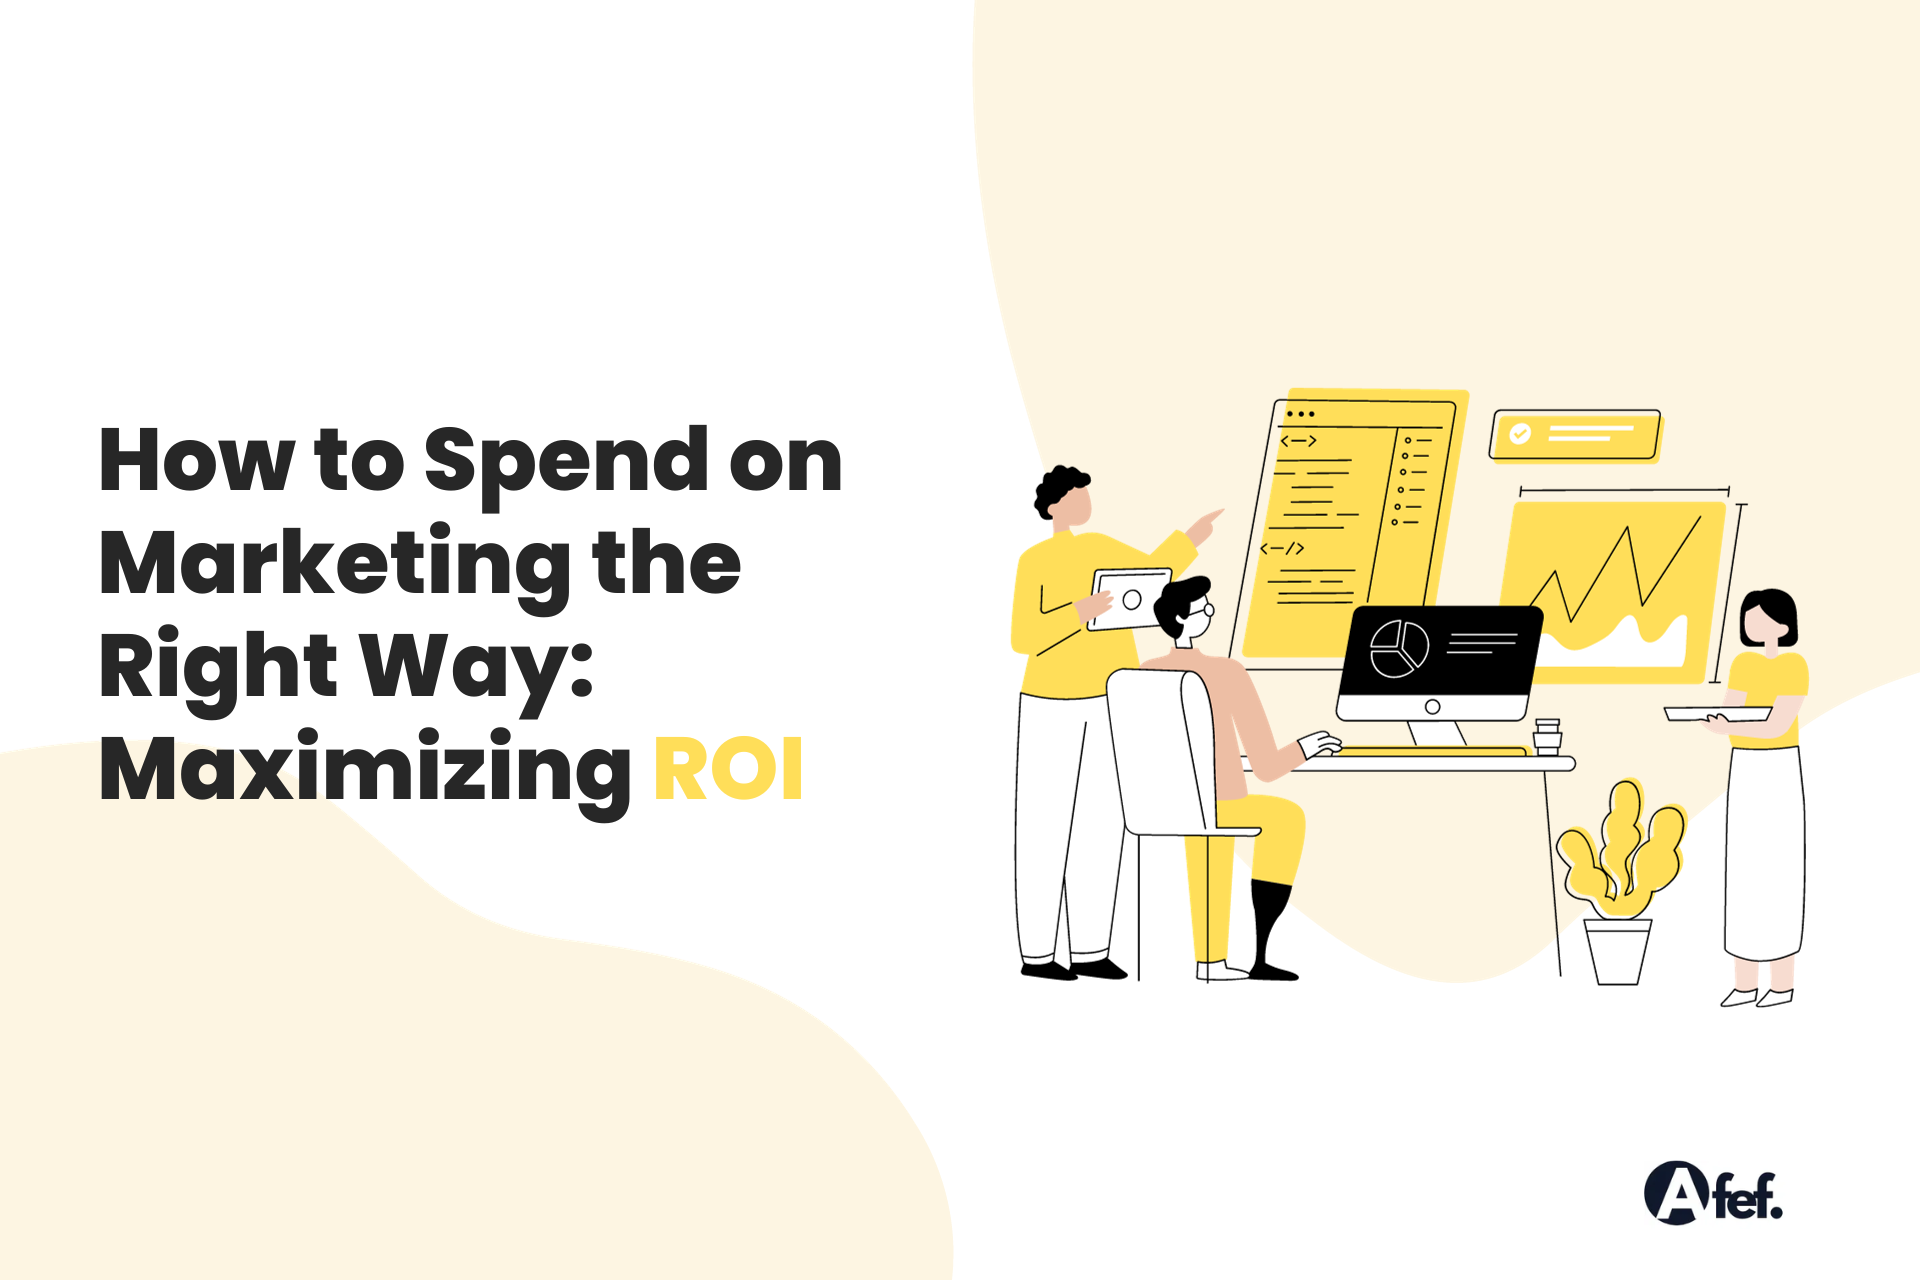 How to Spend on Marketing the Right Way: Maximizing ROI